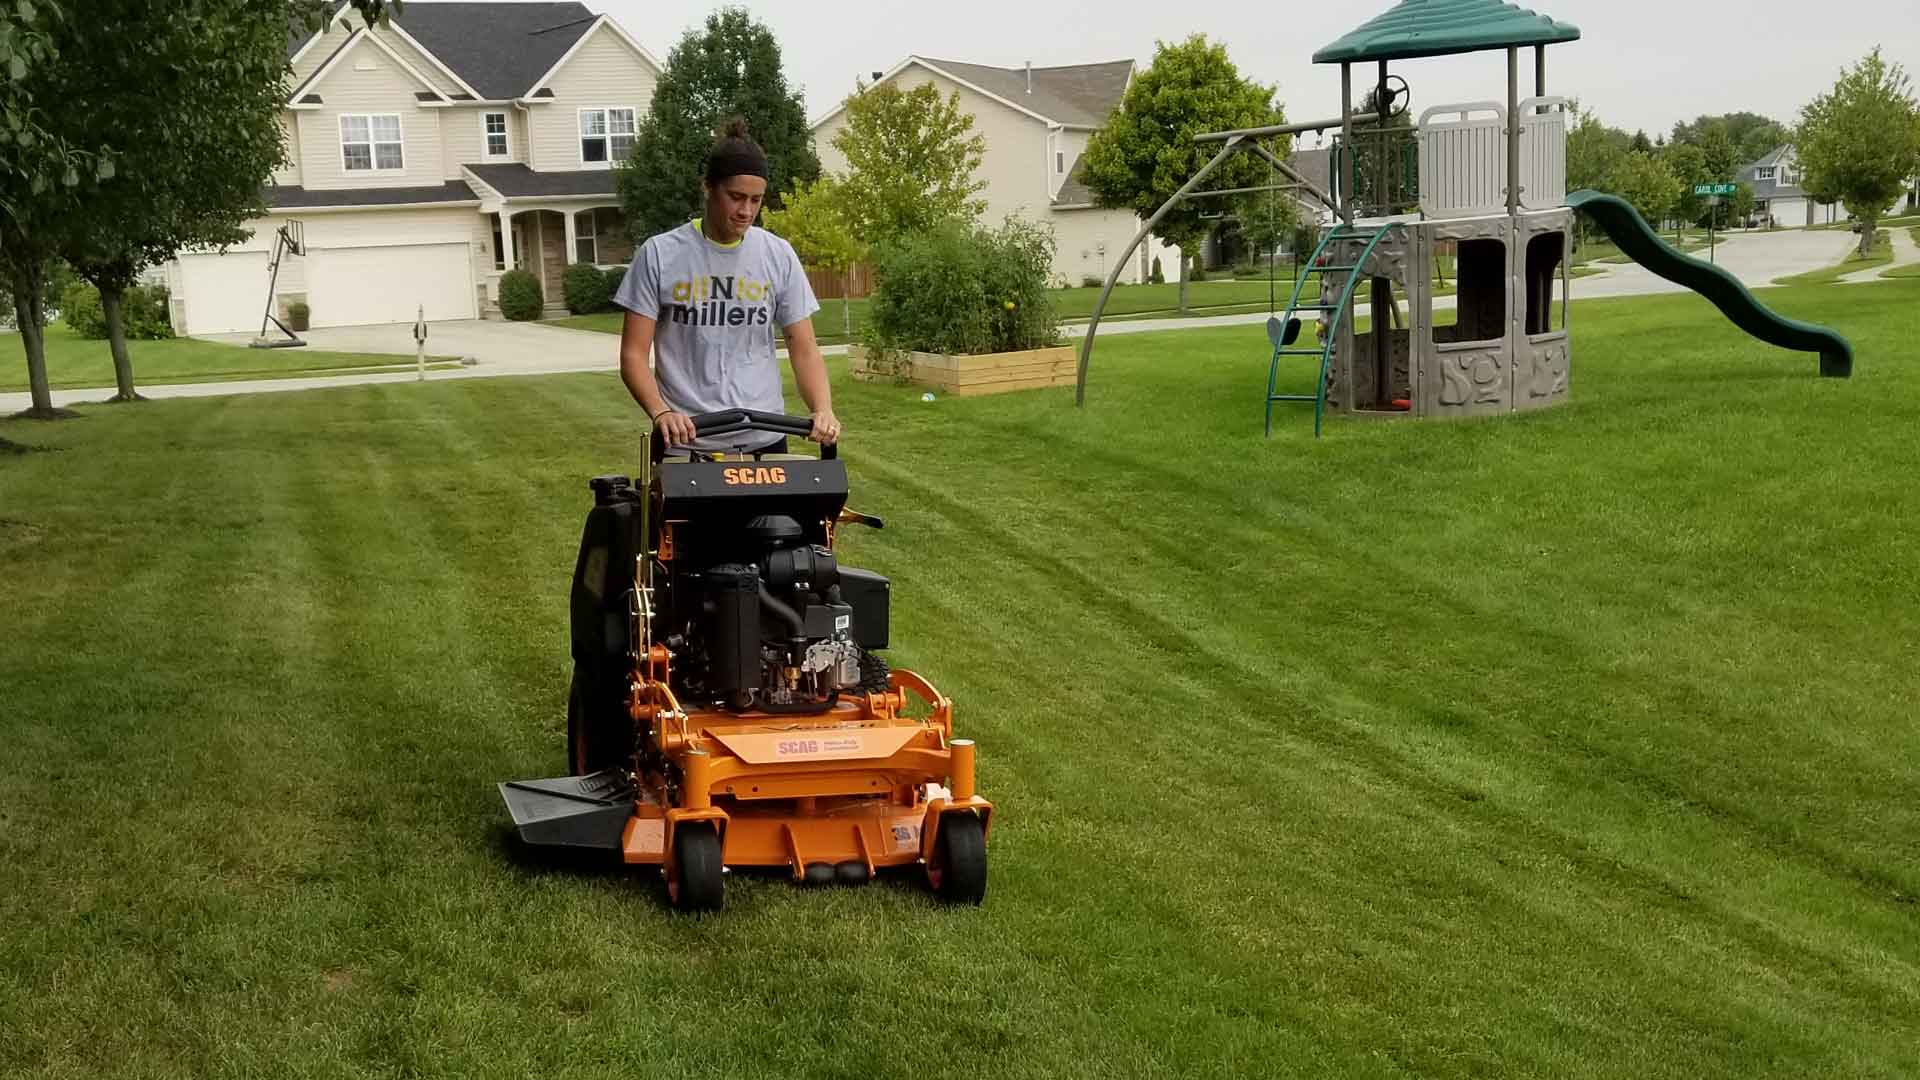 Lawn mowing after spring cleanup services in Noblesville, IN.